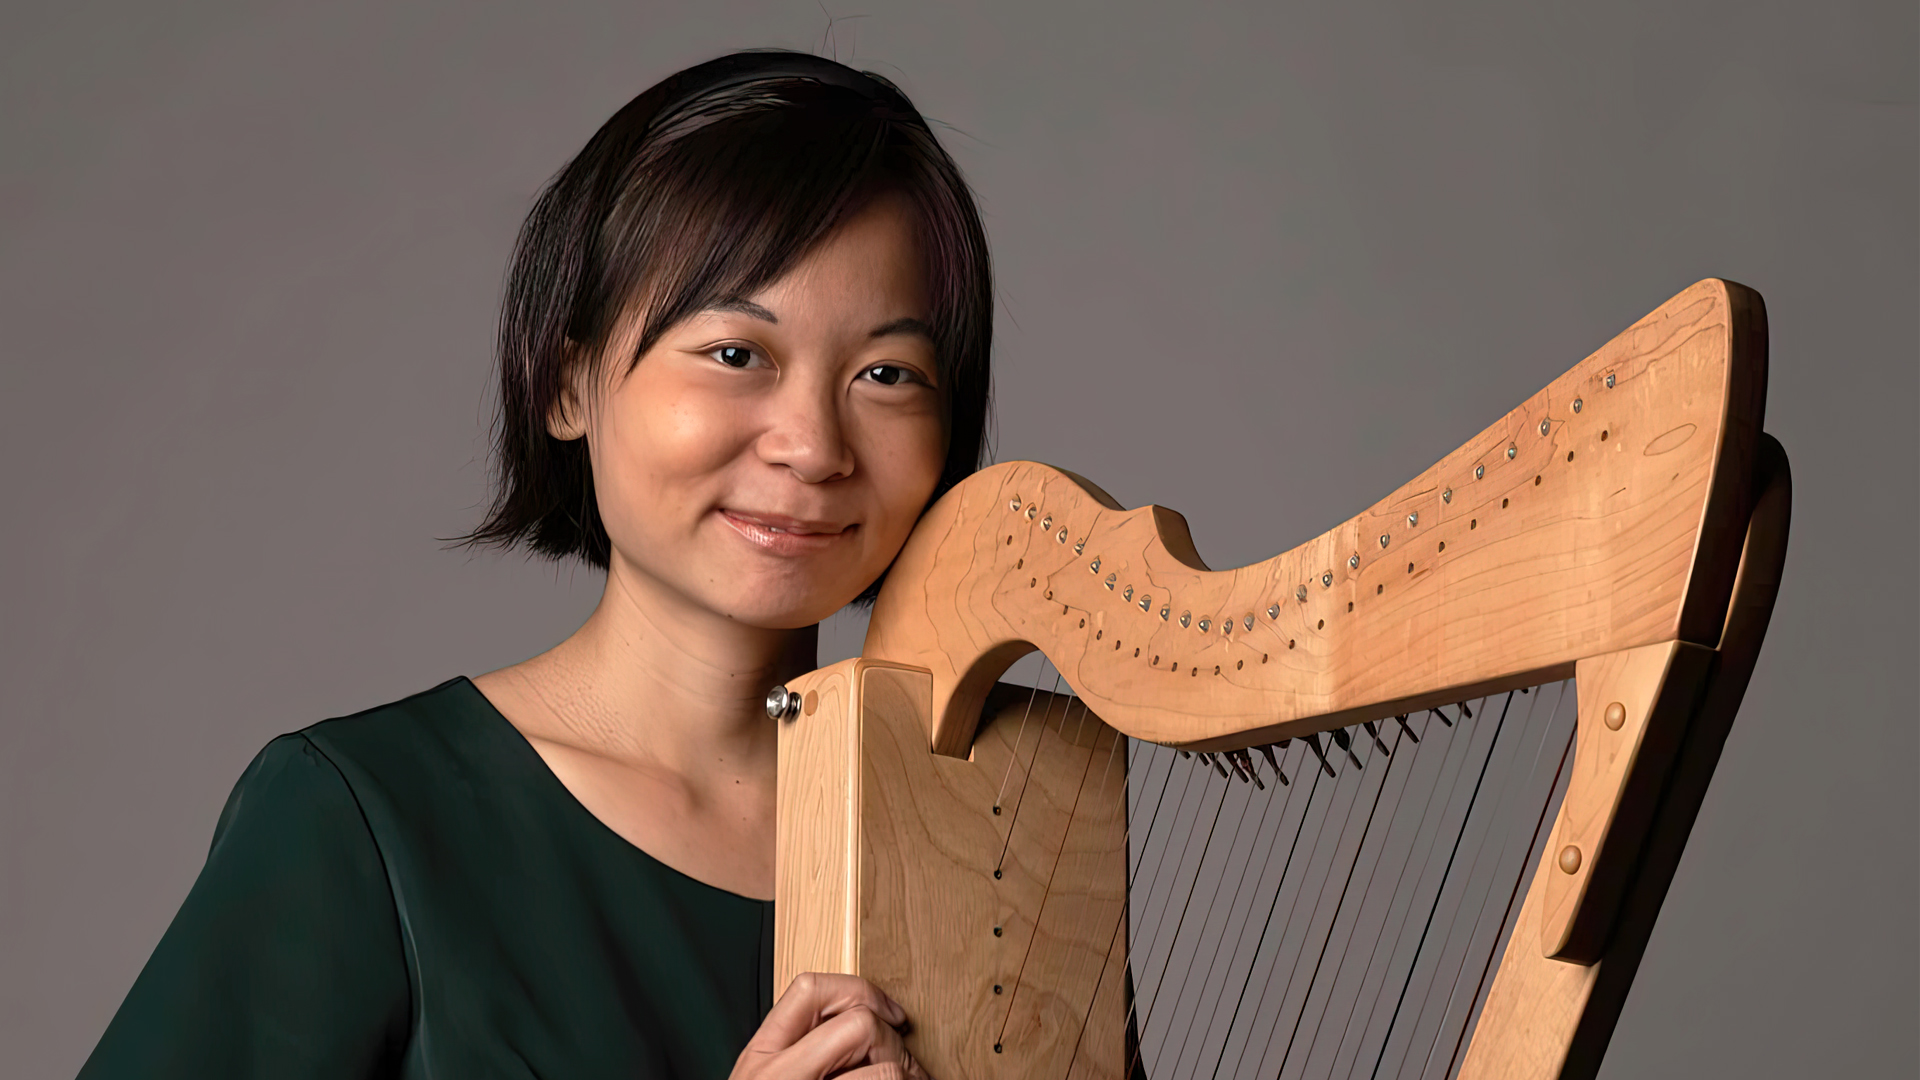 She once disliked music. But a dream of a hedgehog led her to play the harp to help others heal